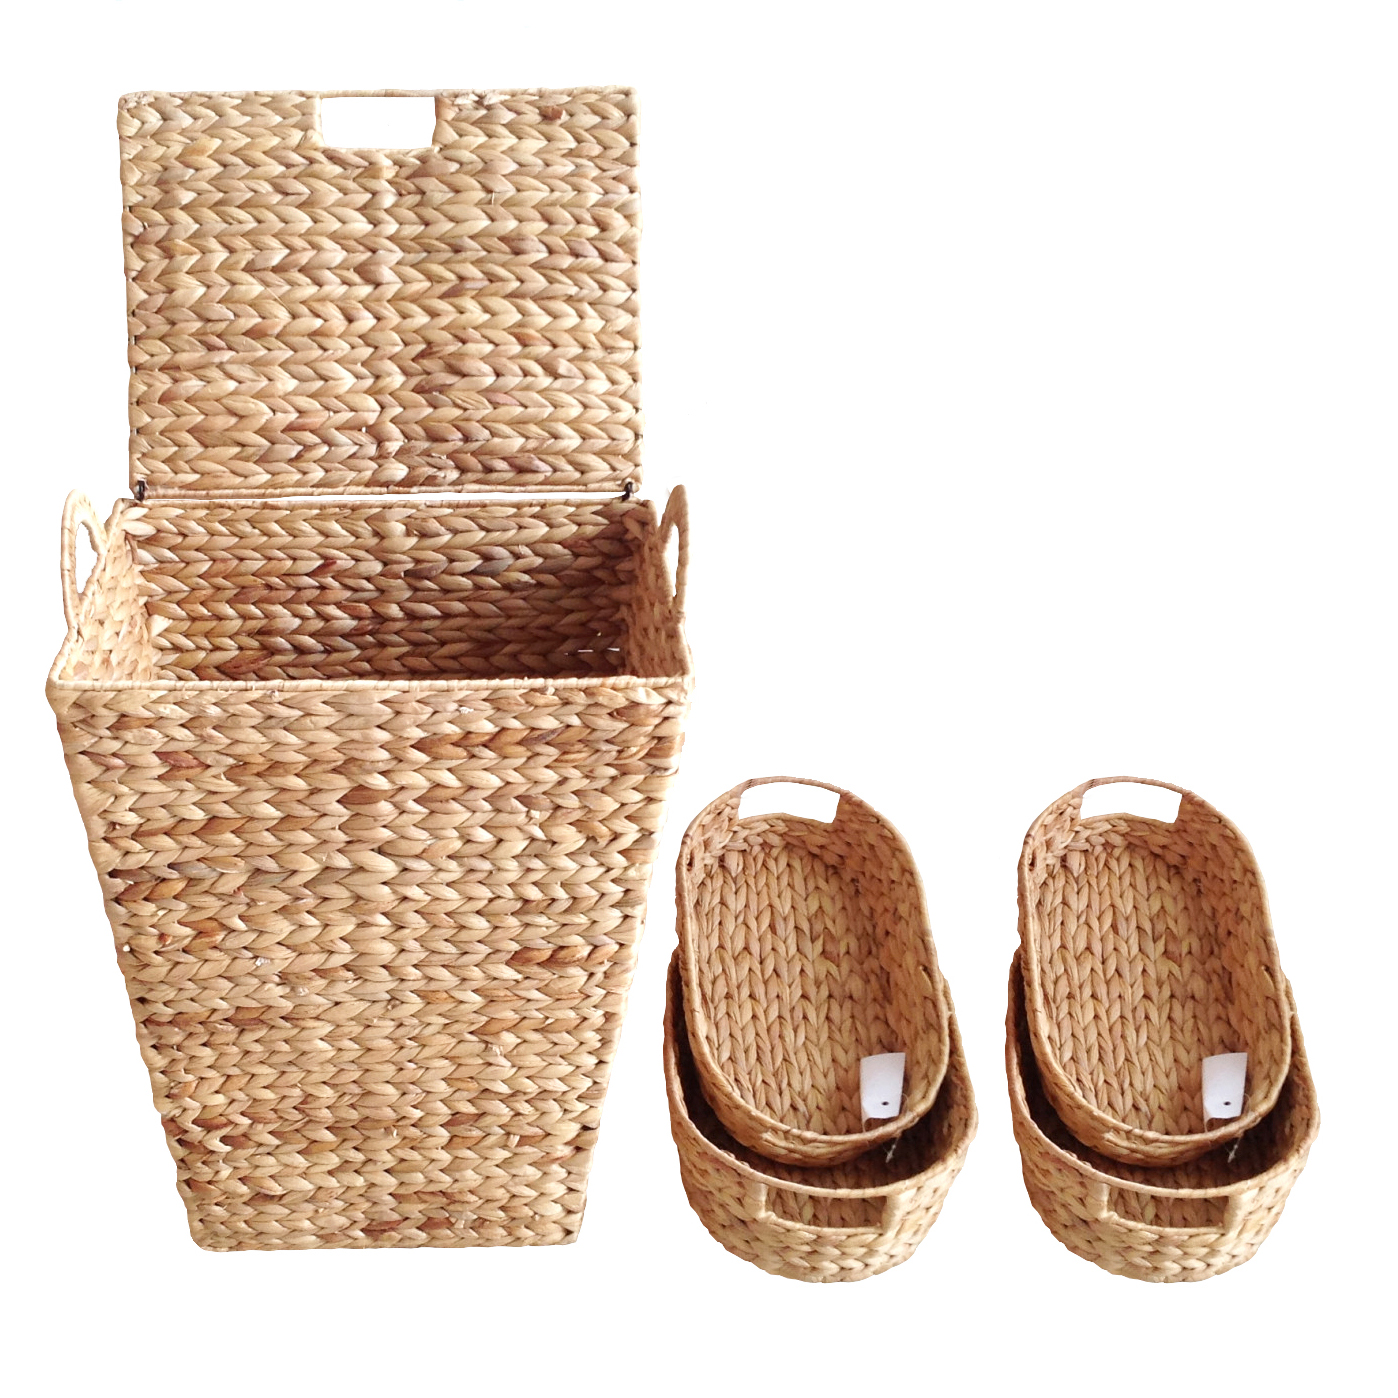 Good Price Rectangular Water Hyacinth Hamper Covered With Lids And 2 Small Baskets Handles On Both Sides Are Easy To Move 1